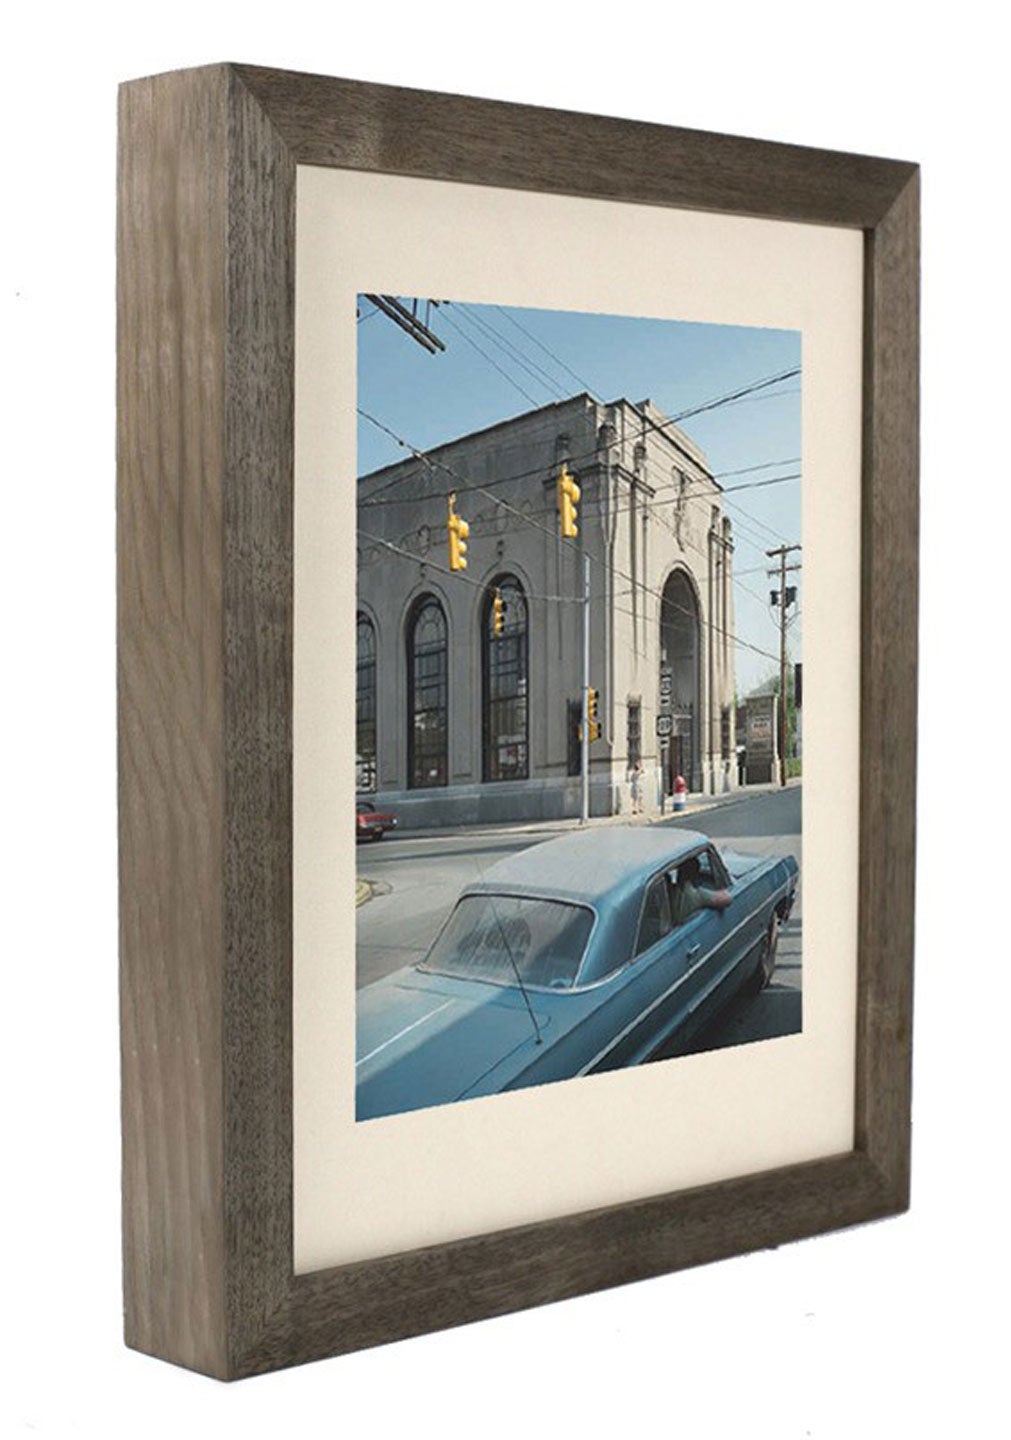 Stephen Shore: Selected Works, 1973-1981, Special Limited Edition (with Tipped-In Type-C Print in Custom-Made Frame) [SIGNED]